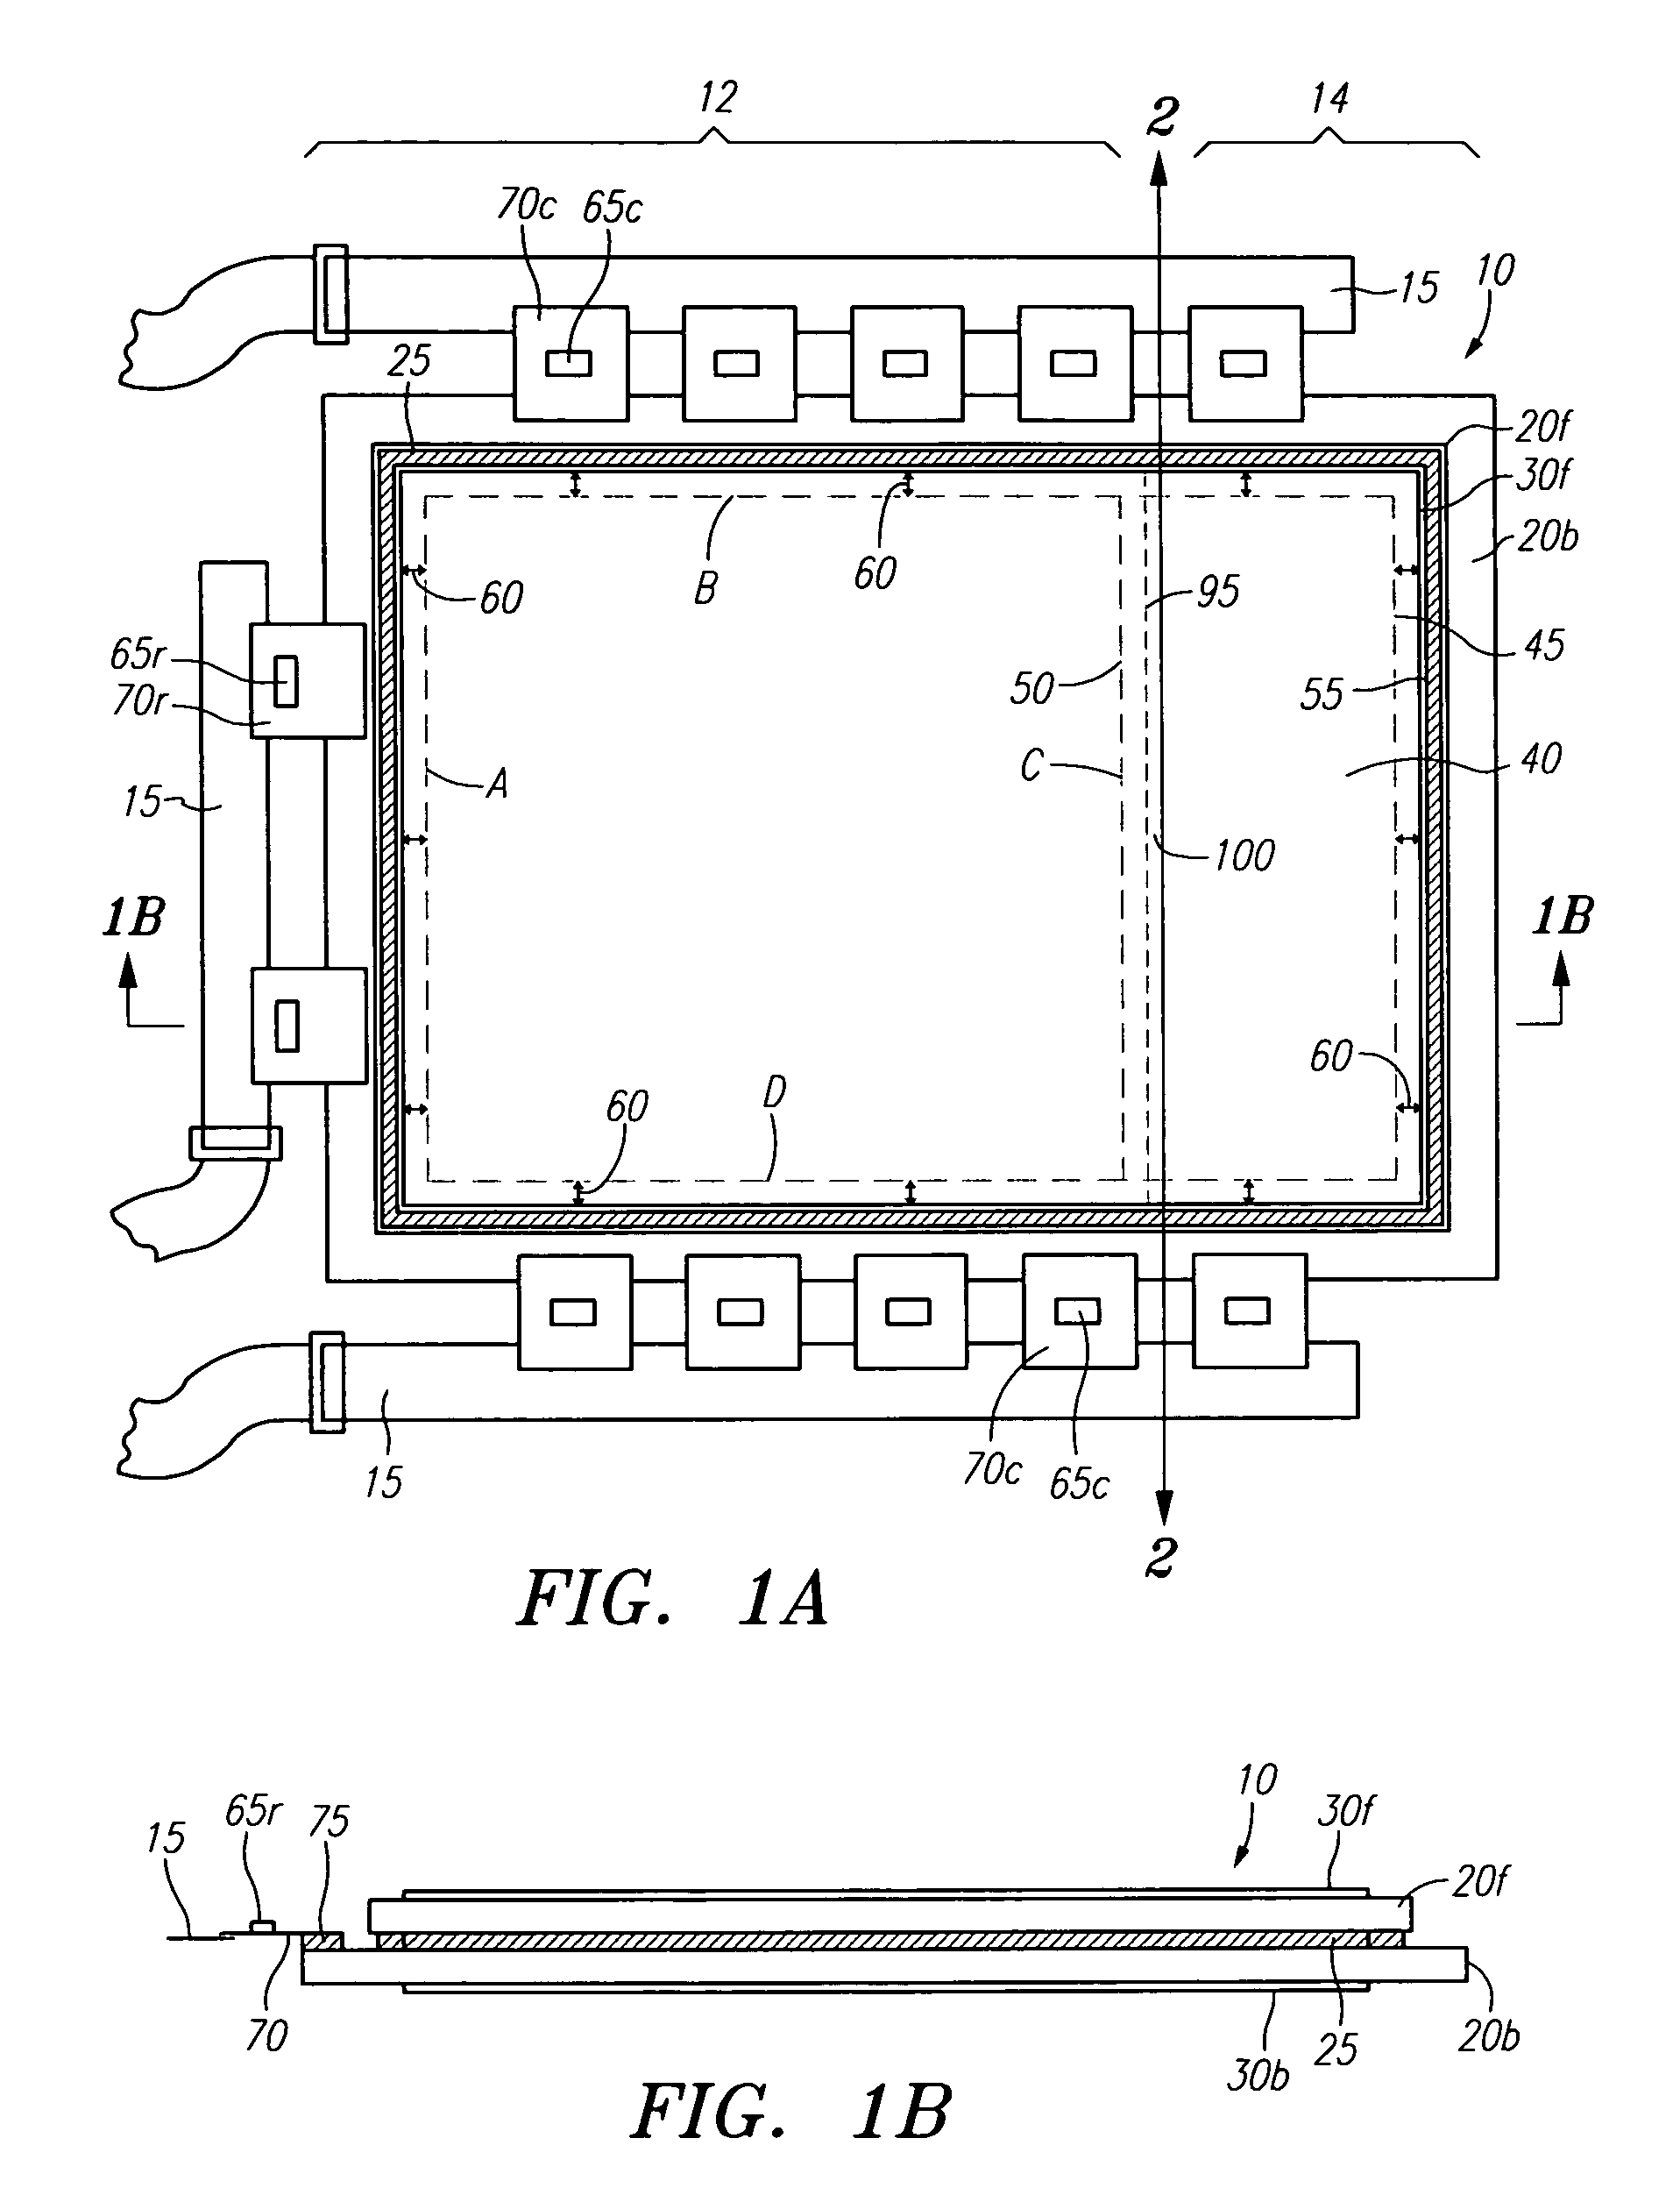 Apparatus and methods for cutting electronic displays during resizing